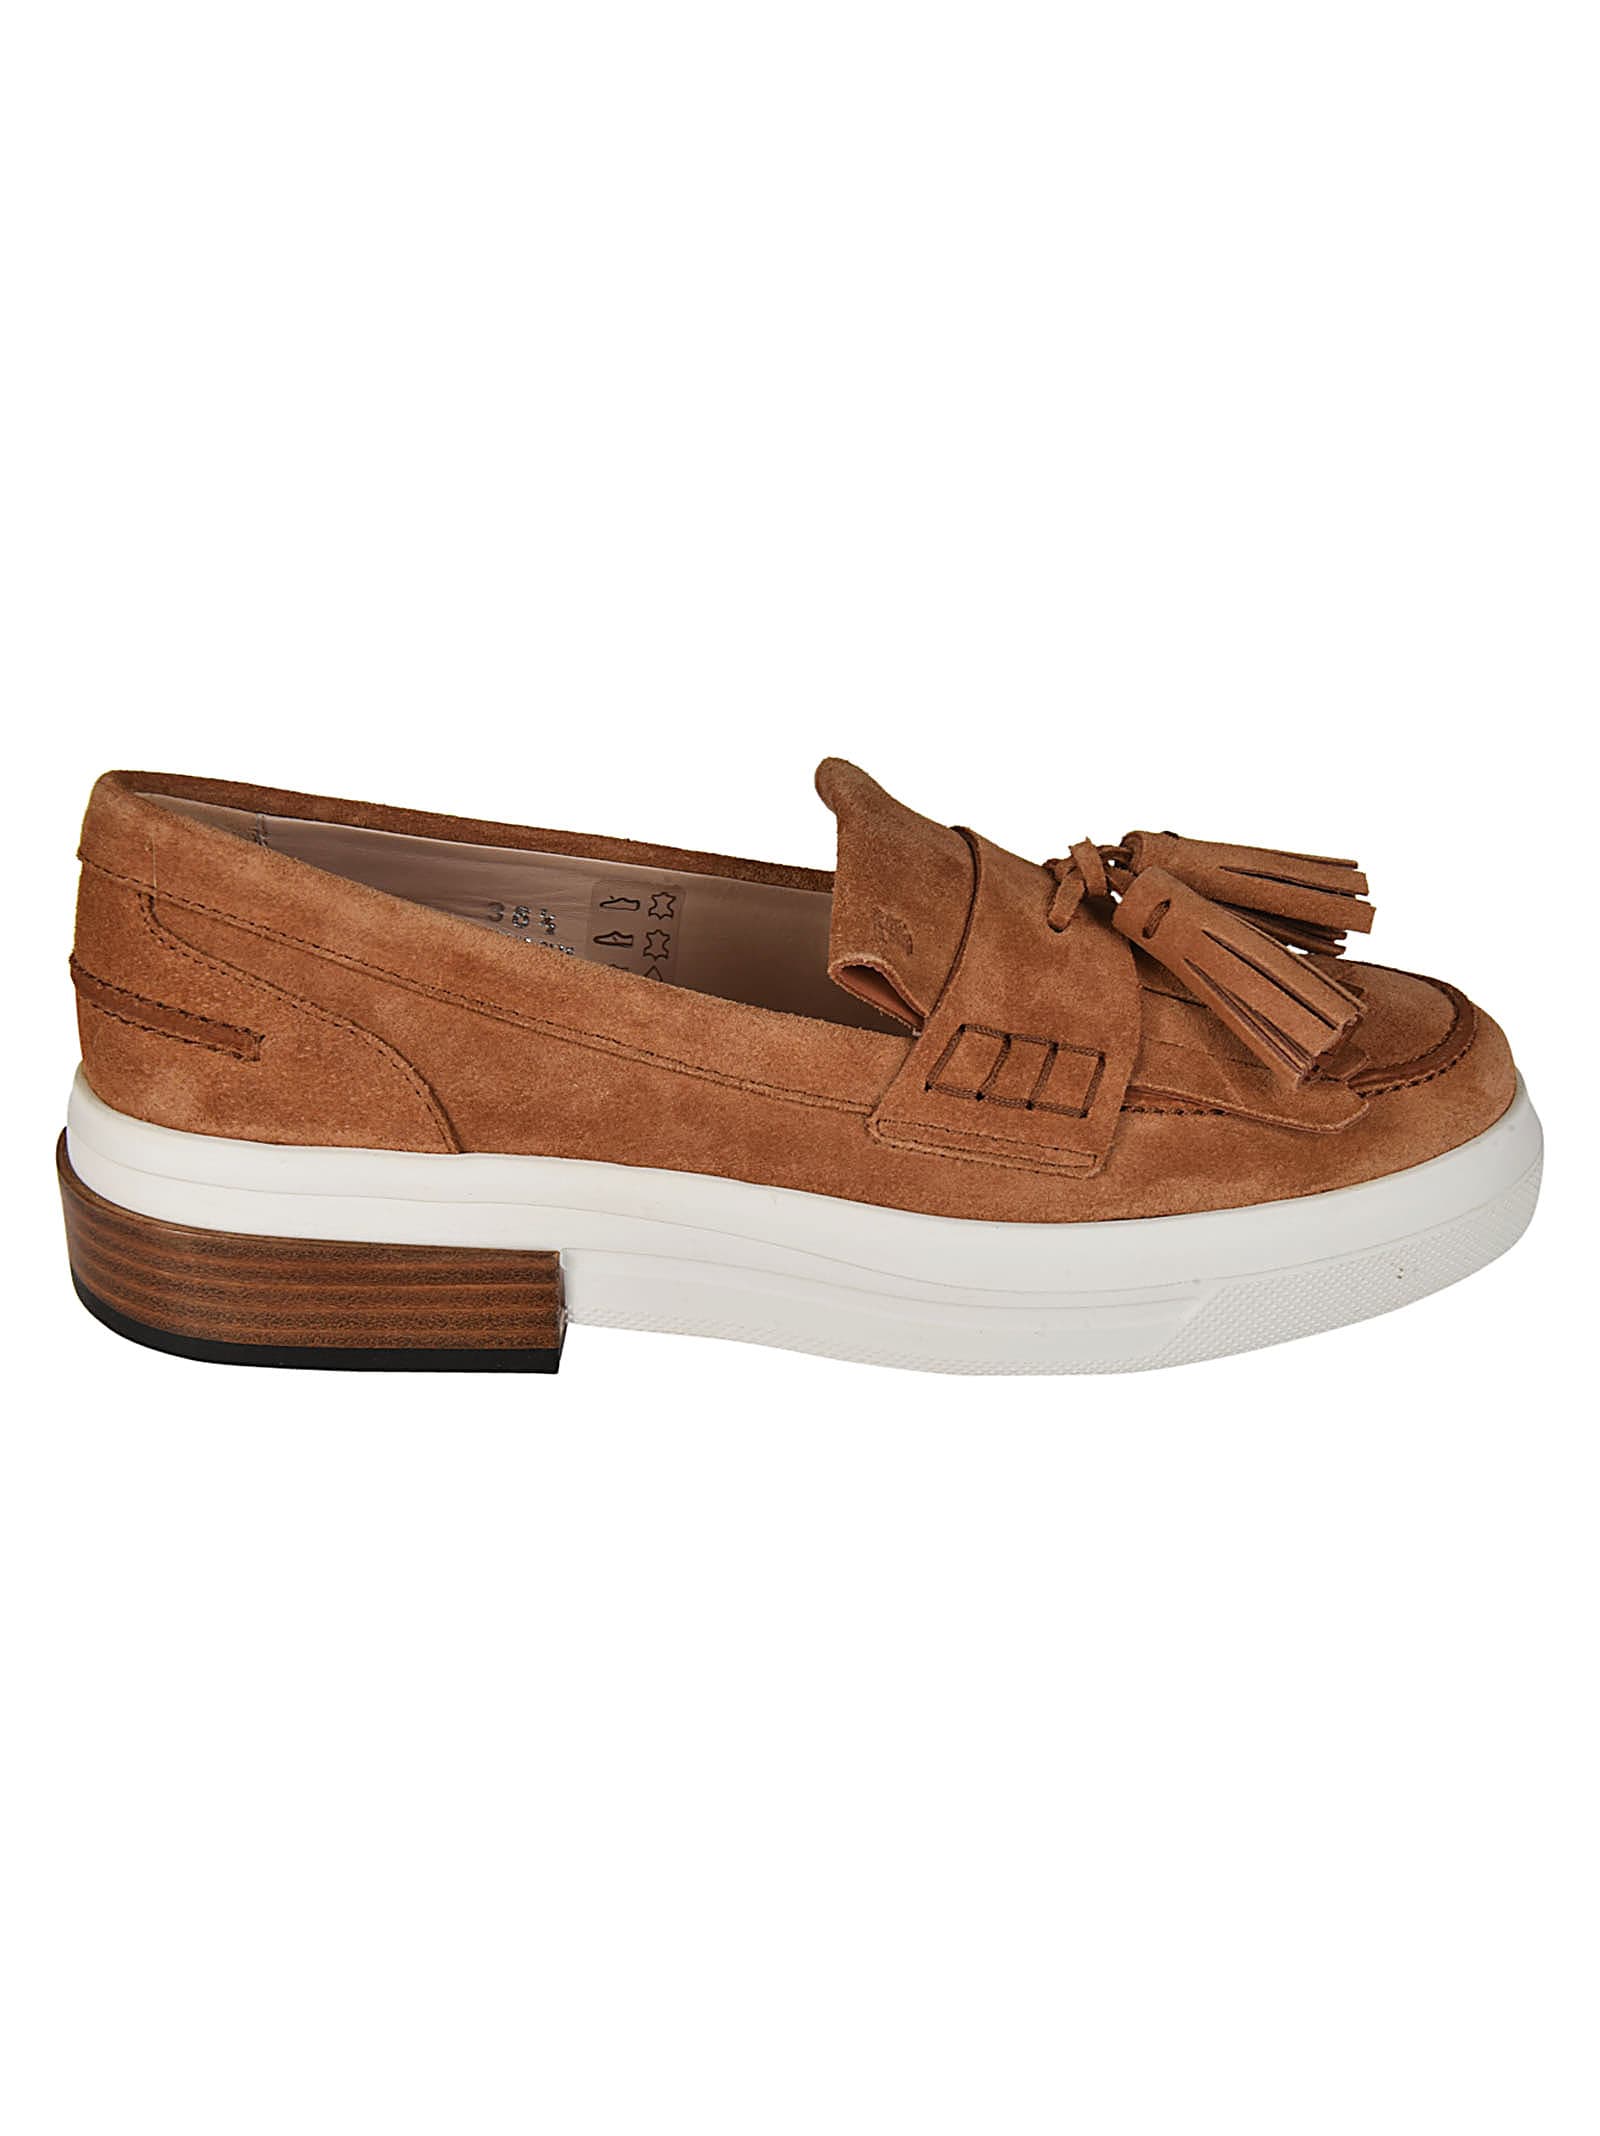 Buy Tods Flat Shoes online, shop Tods shoes with free shipping